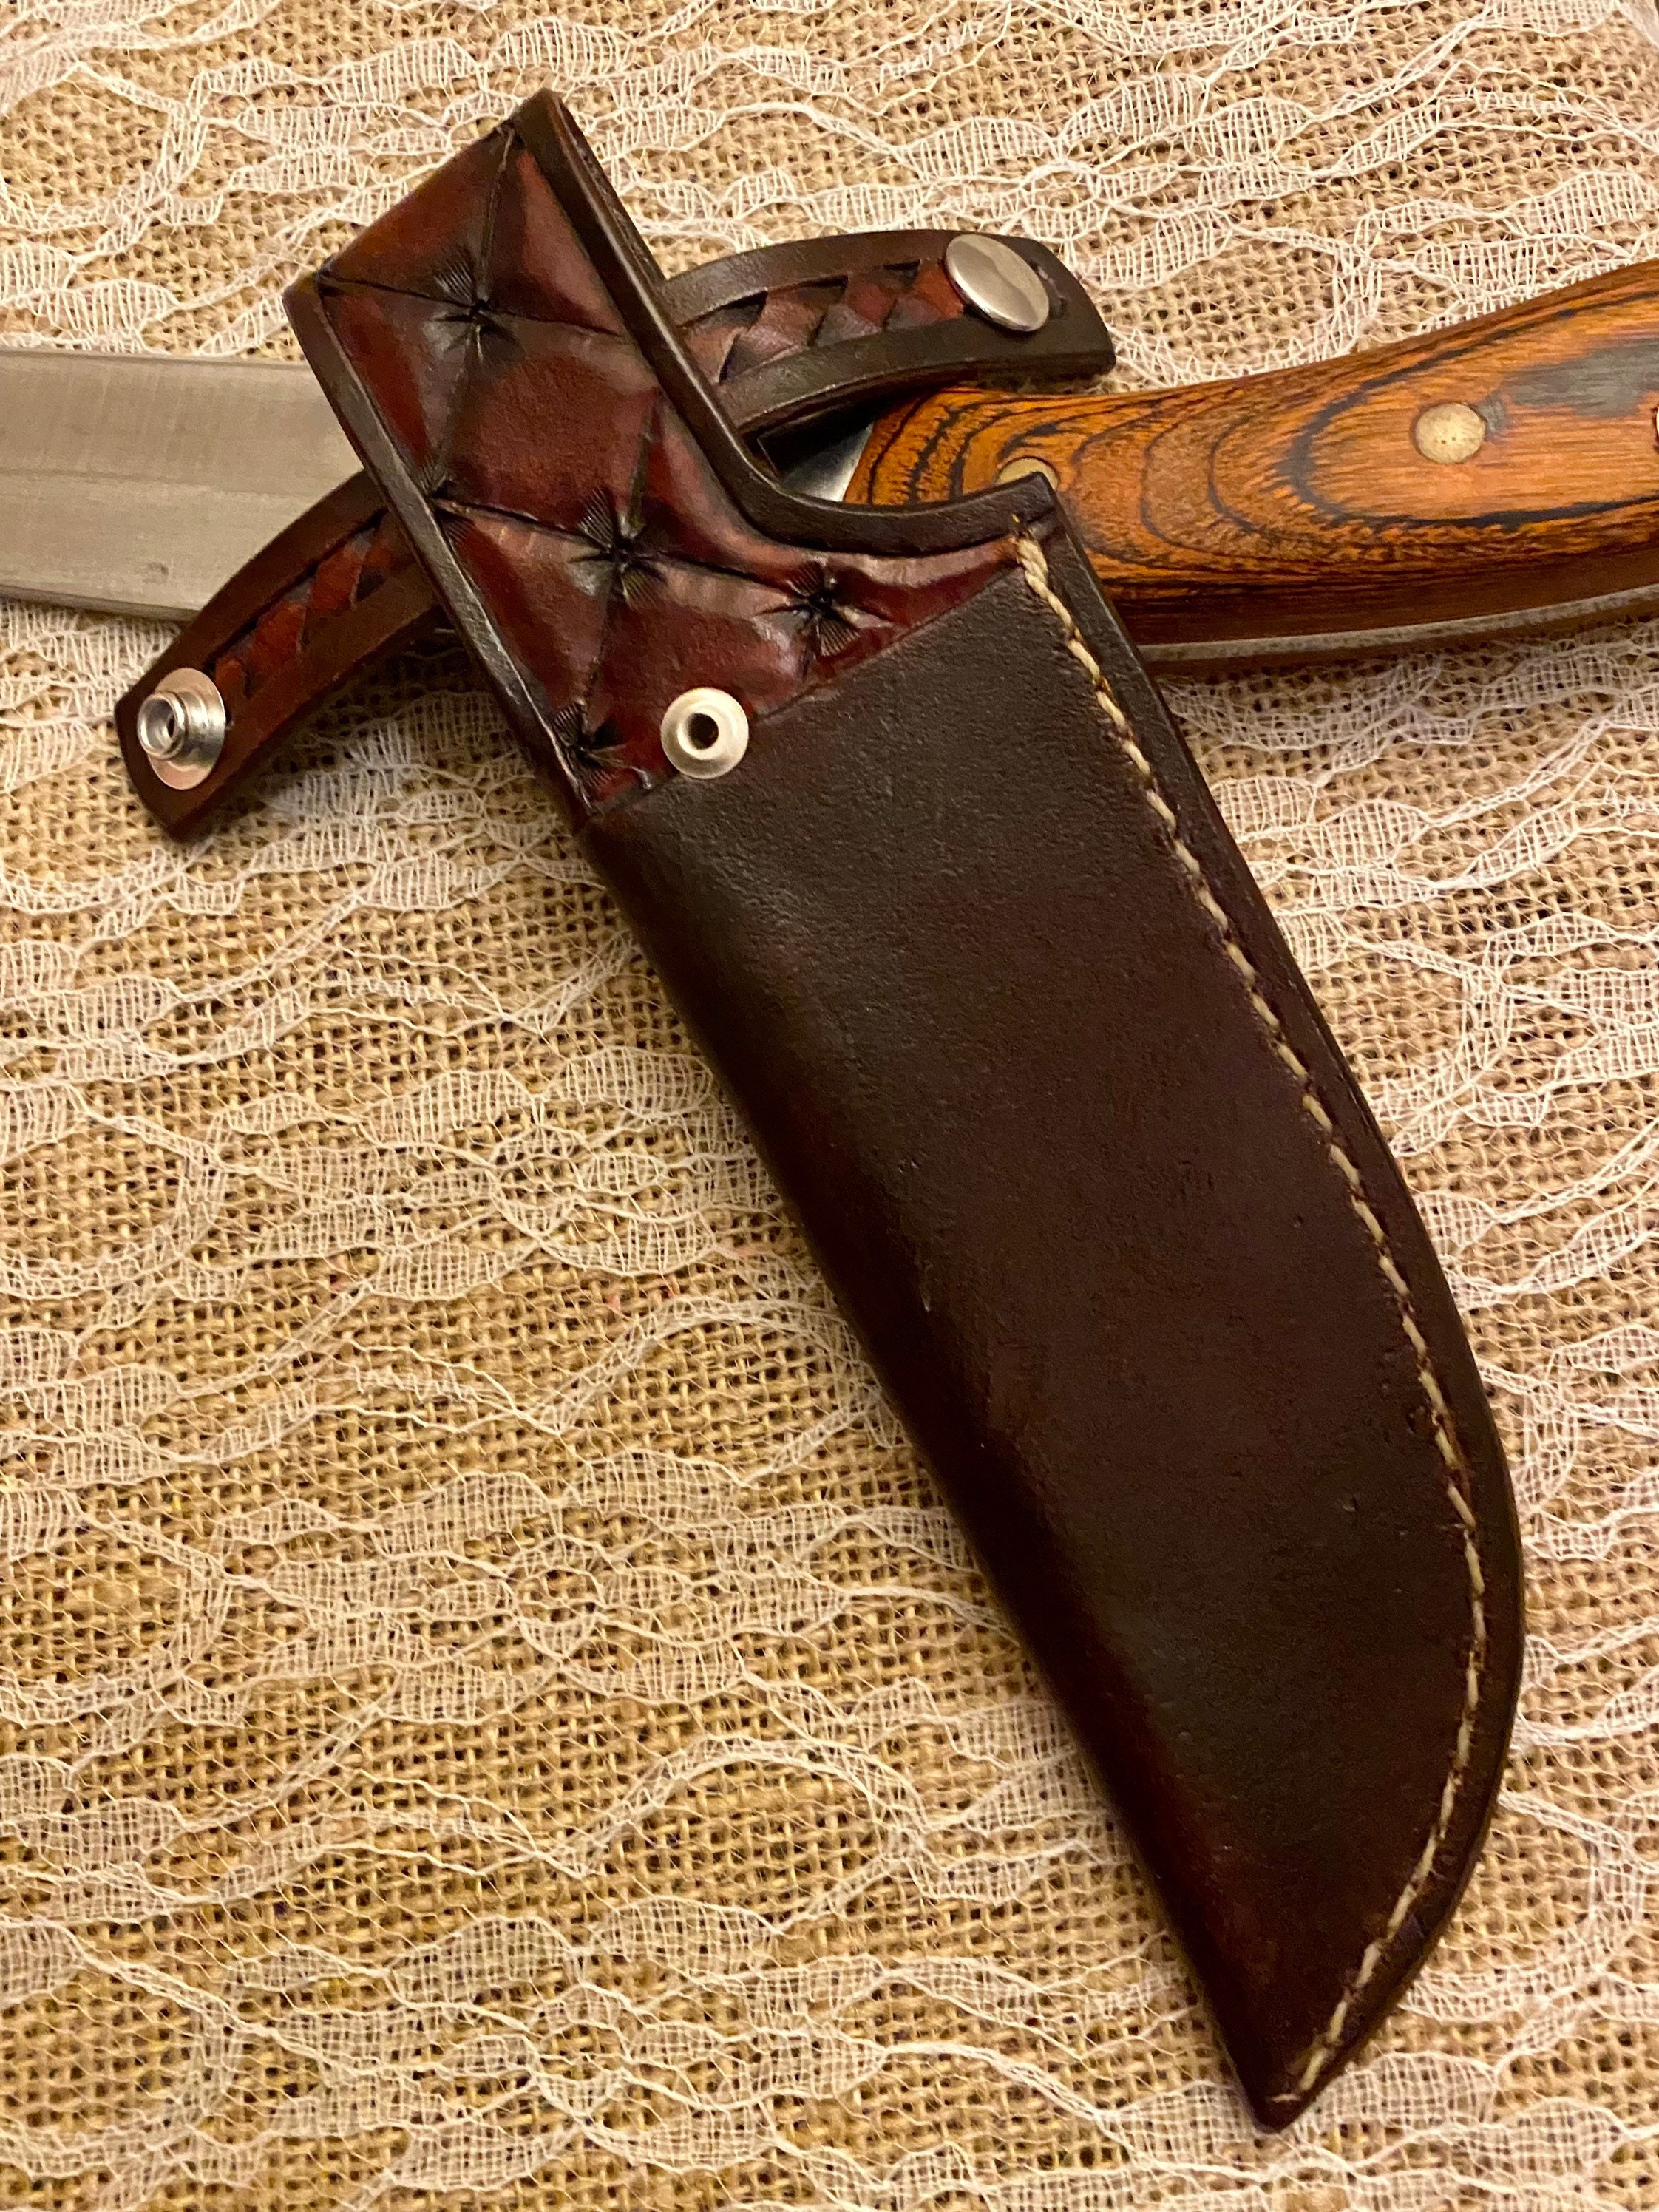 Pictavia Leather - A nice knife deserves a nice sheath. We don't have any  complete Pictish knife finds, nor any leather sheath finds here in  Scotland. This makes it extremely difficult to